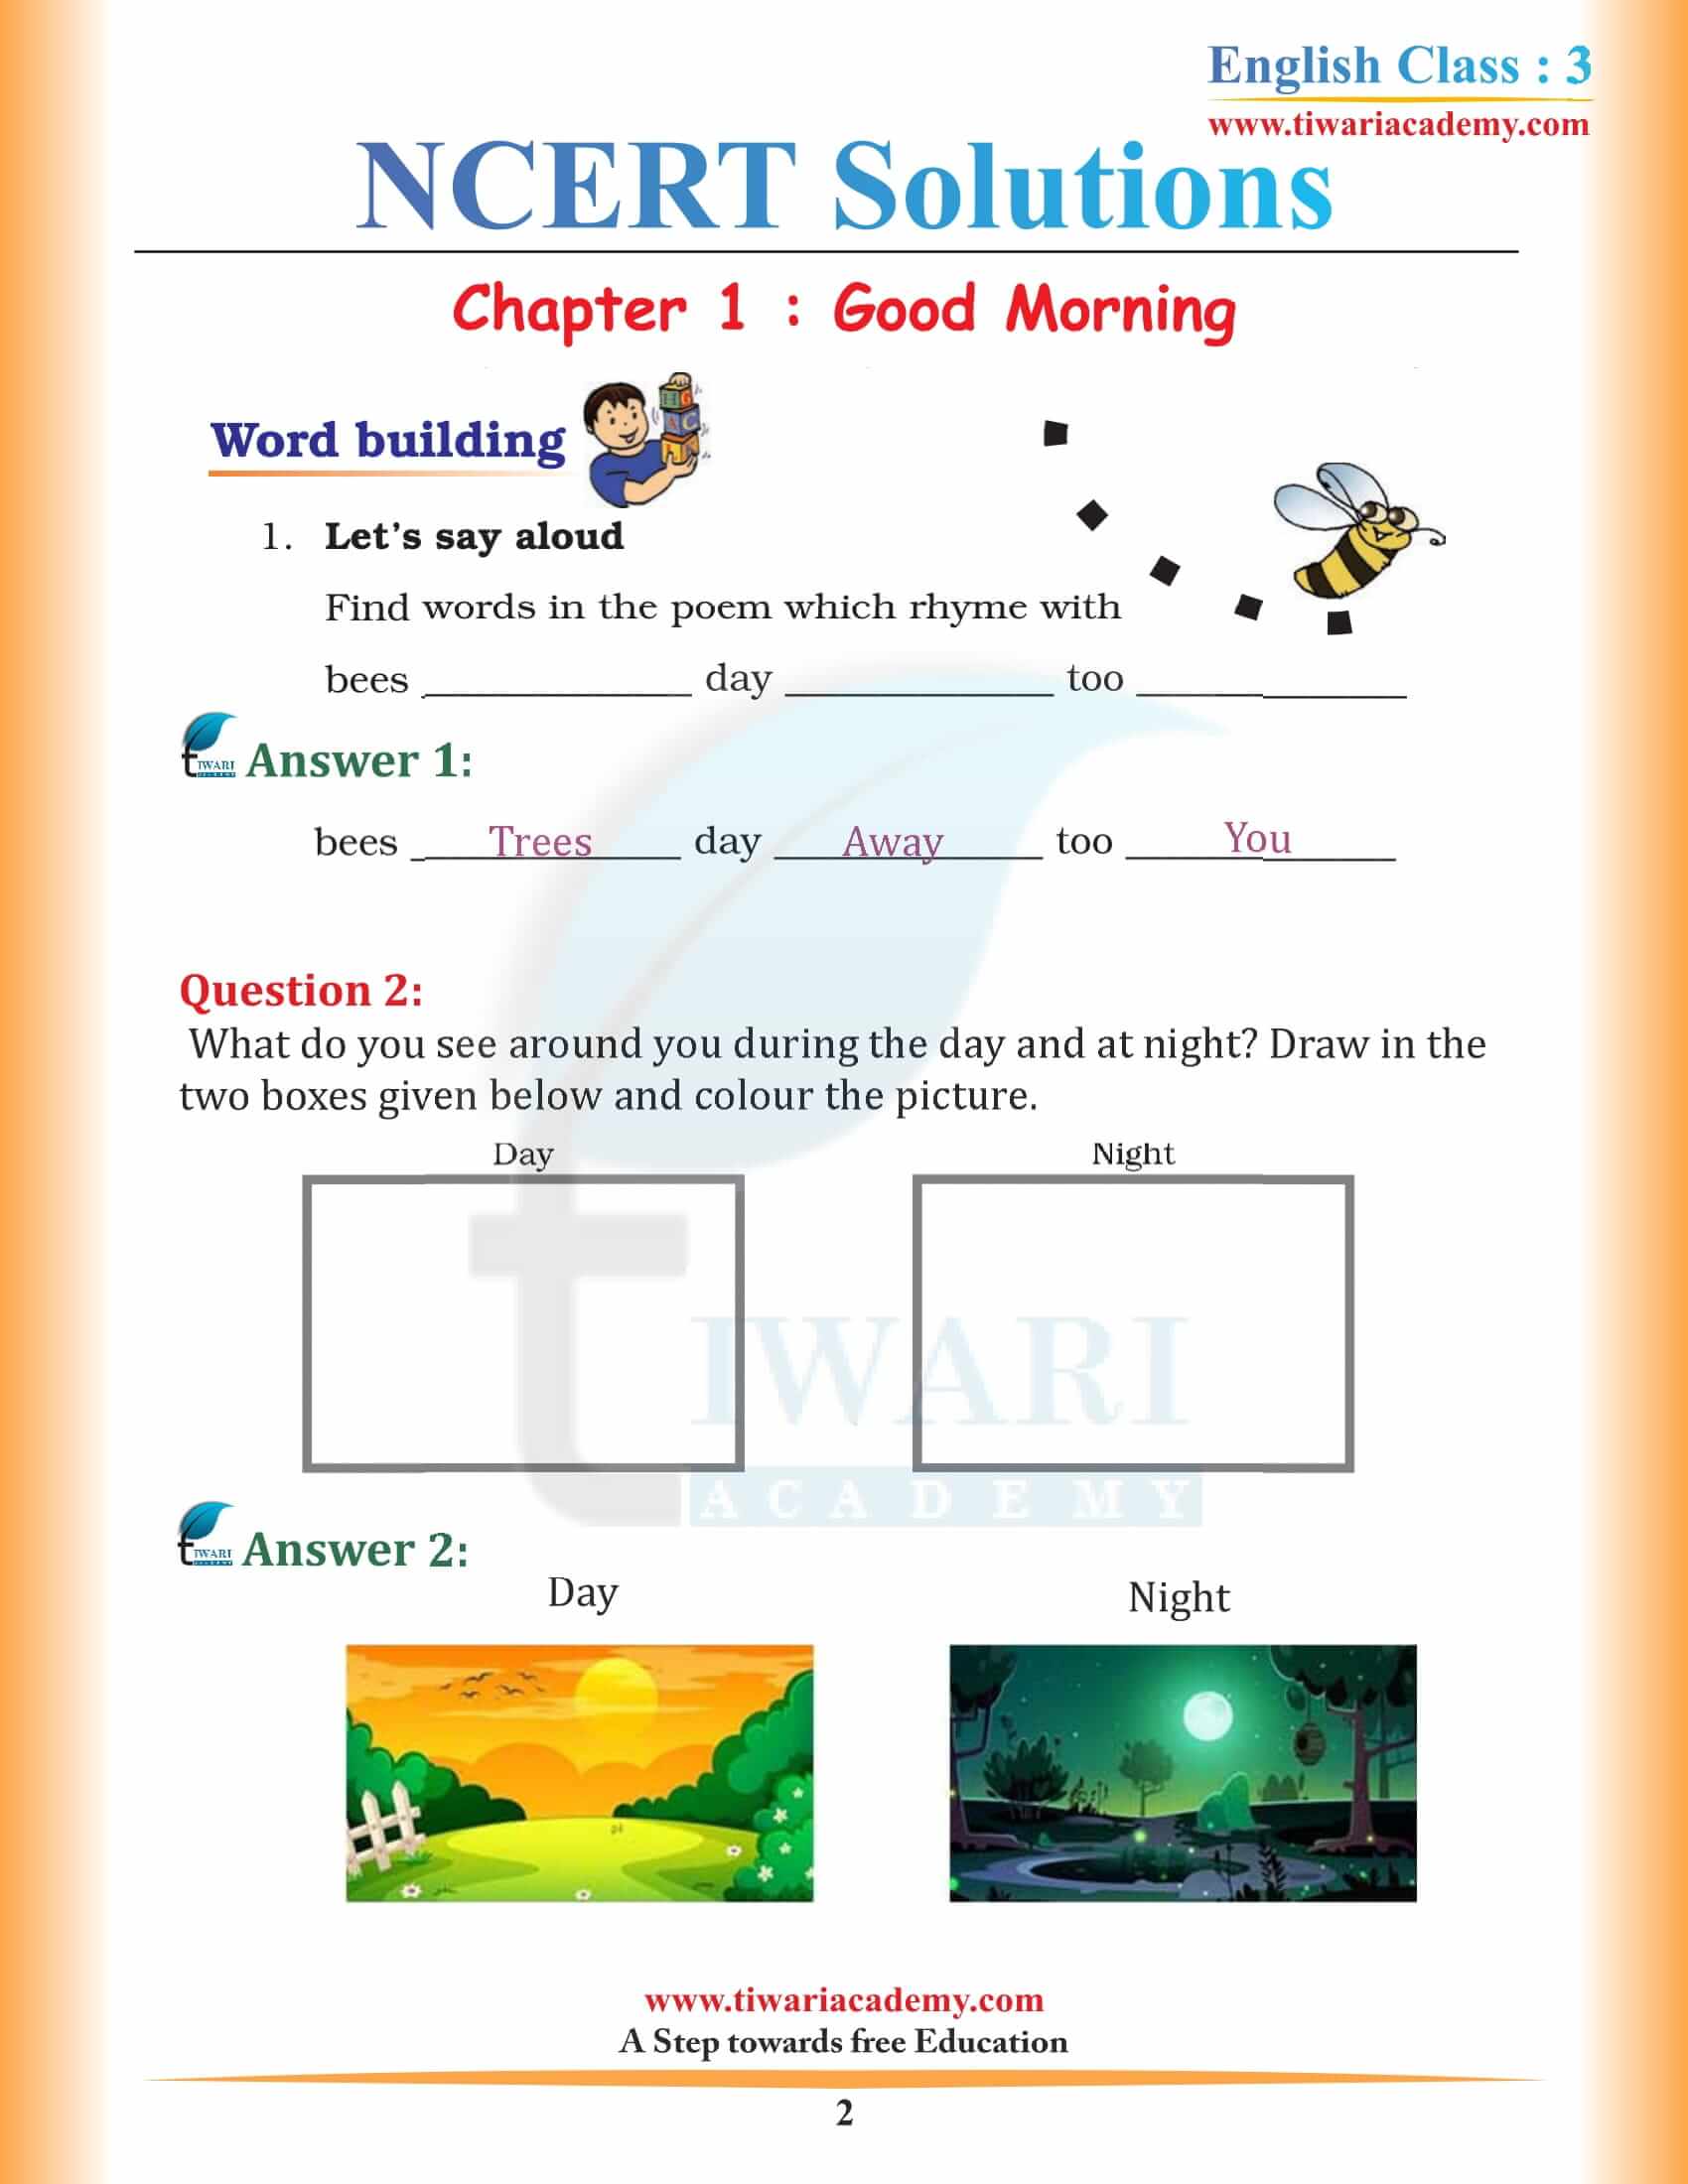 NCERT Solutions for Class 3 English Marigold 3 Unit 1